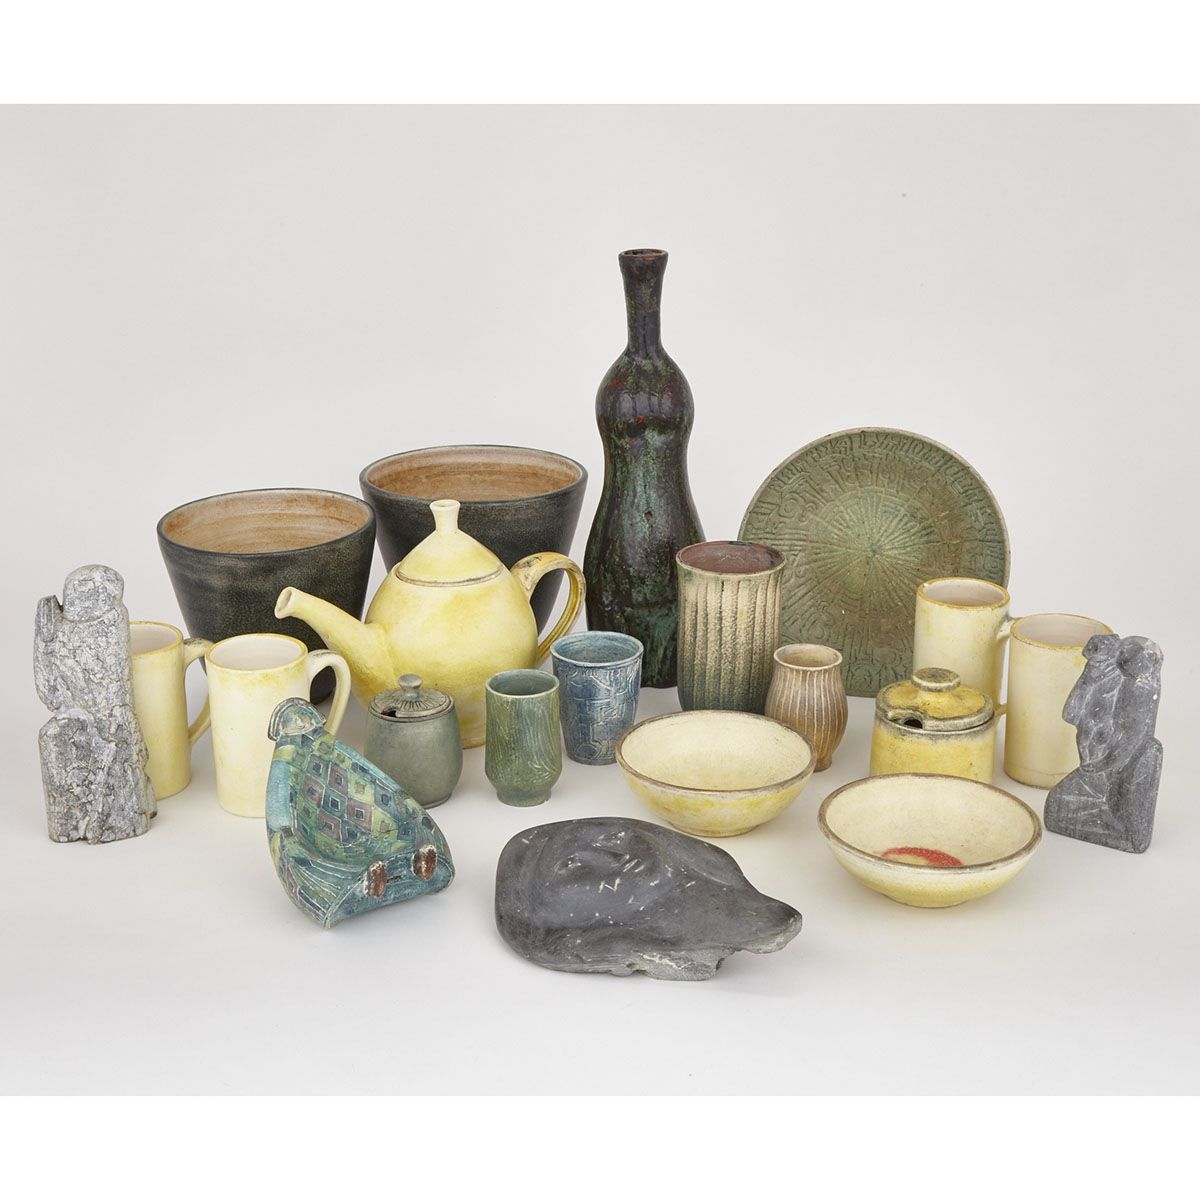 Group of Brooklin Pottery and Soapstone Carvings, Theo and Susan Harlander, c.1960-75